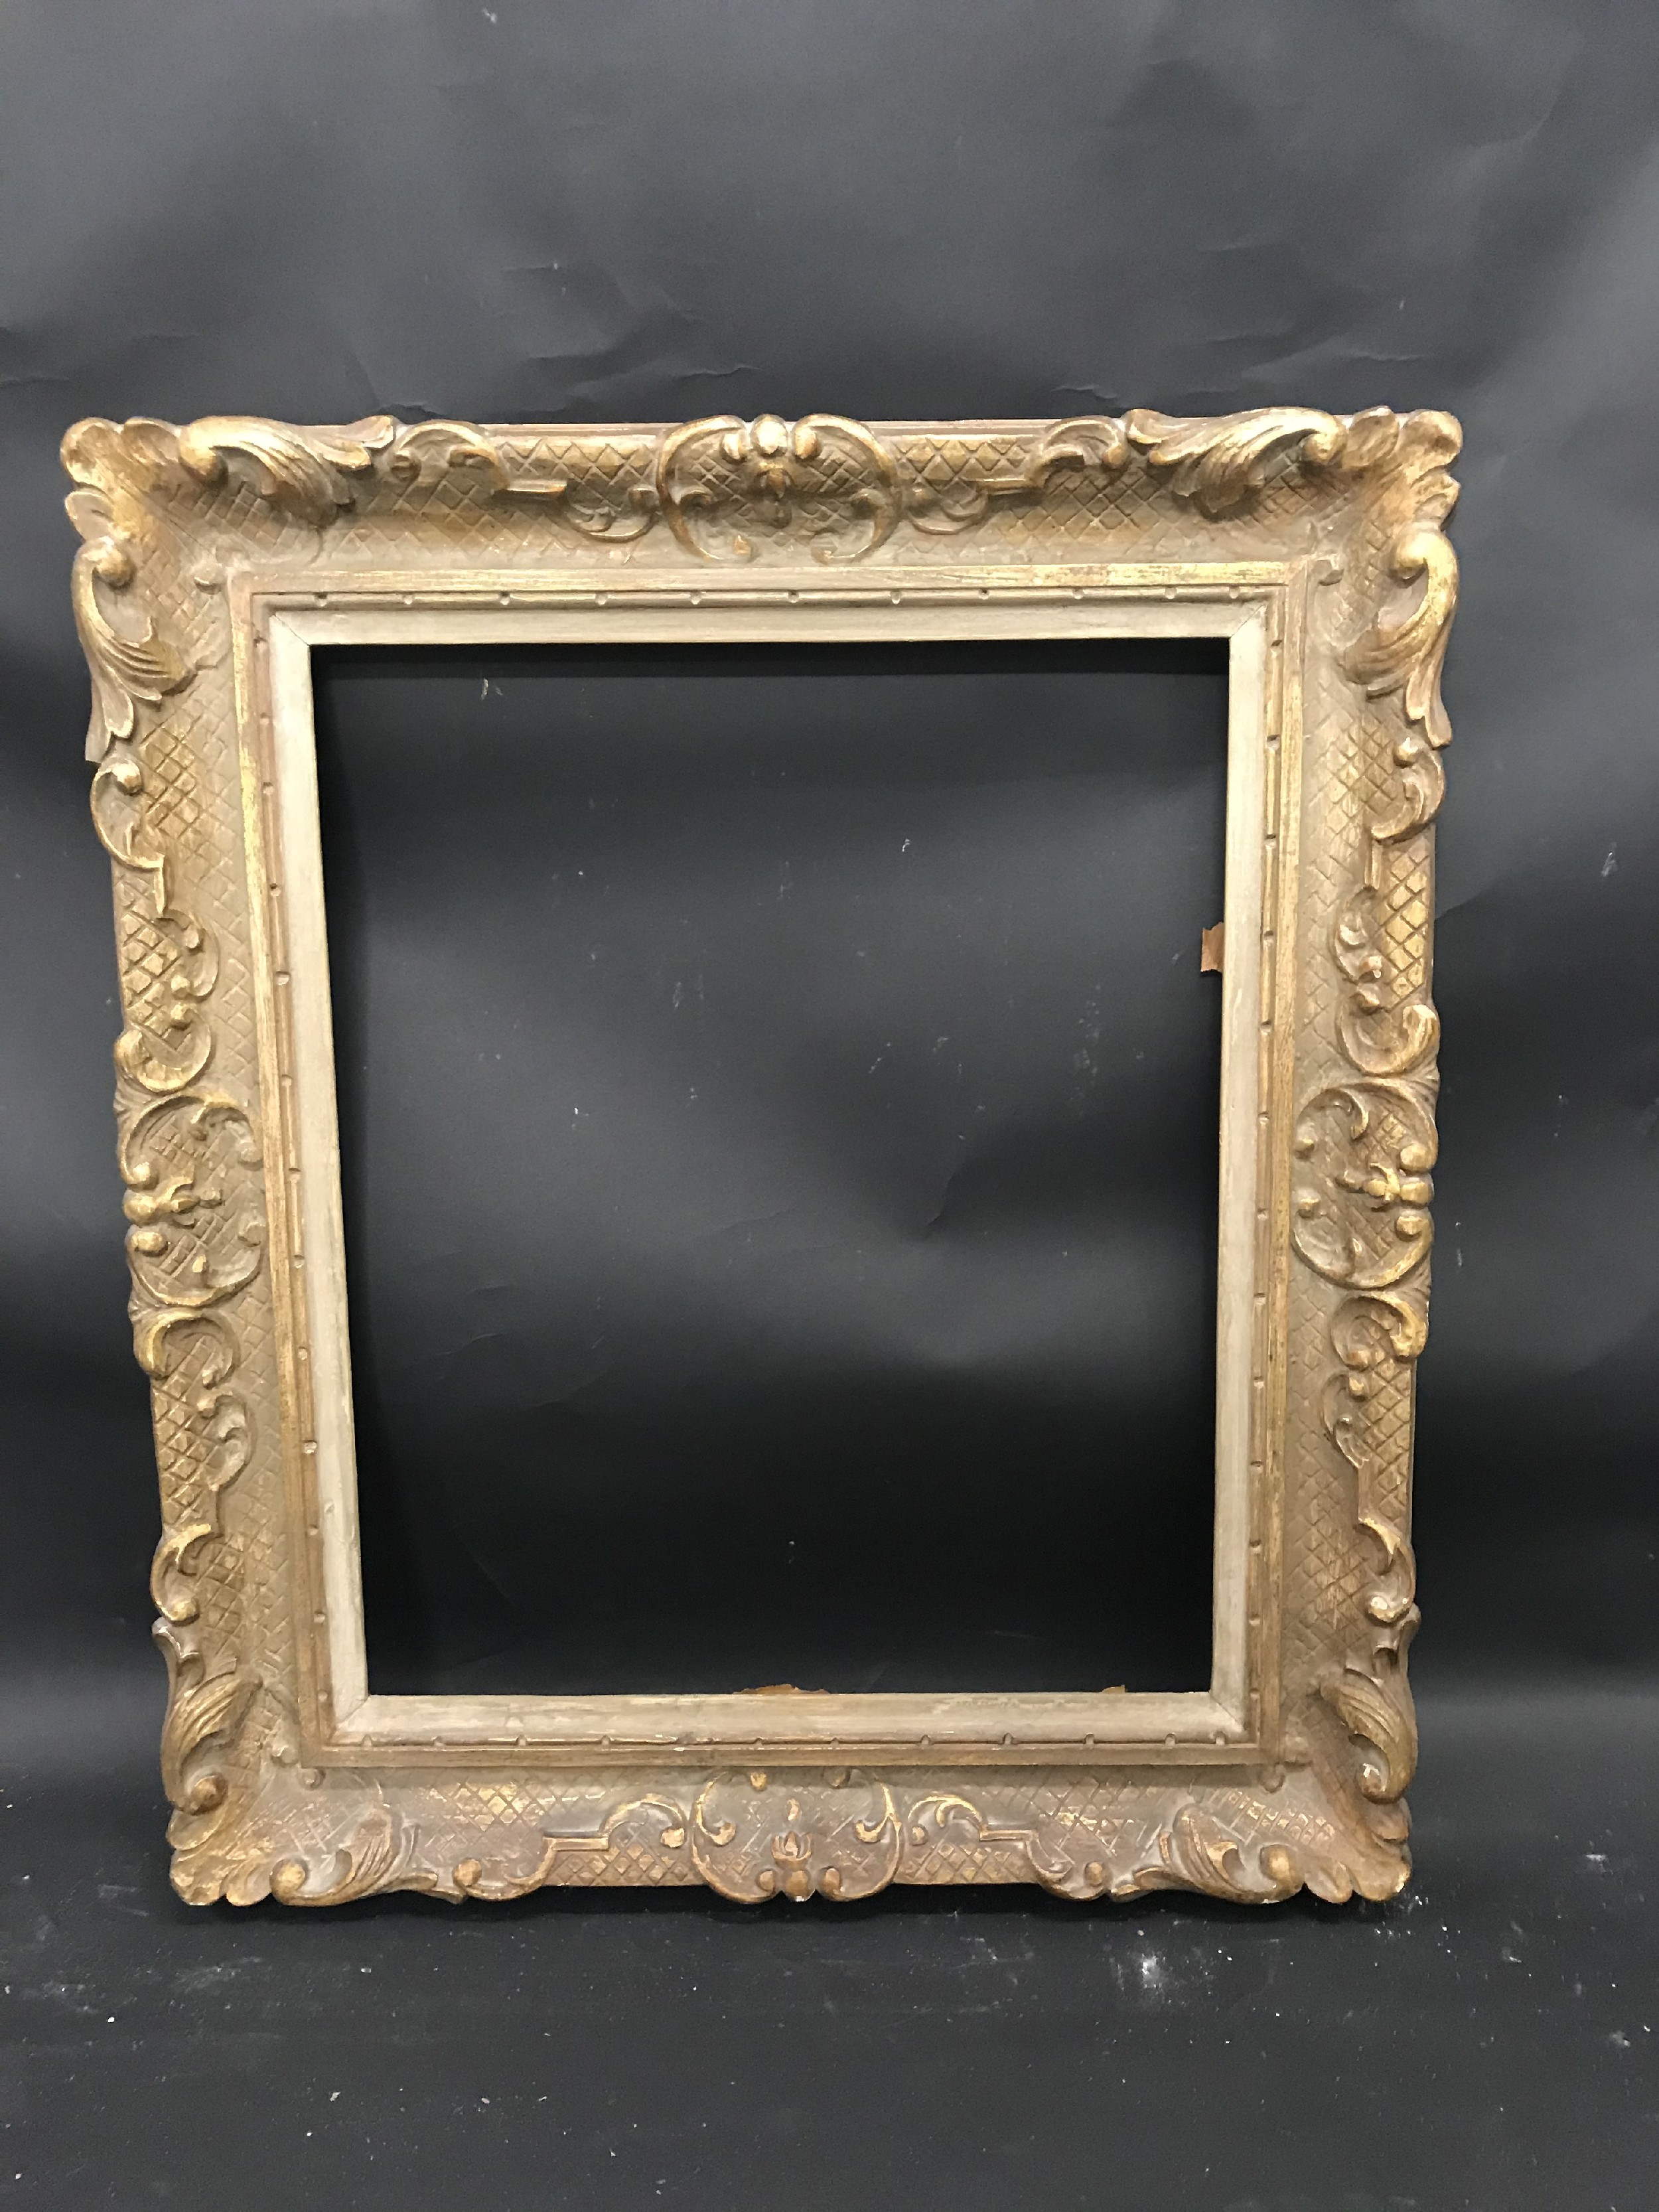 20th Century English School. A Carved Giltwood Frame, with white slip, 18" x 15" (rebate). - Image 2 of 3